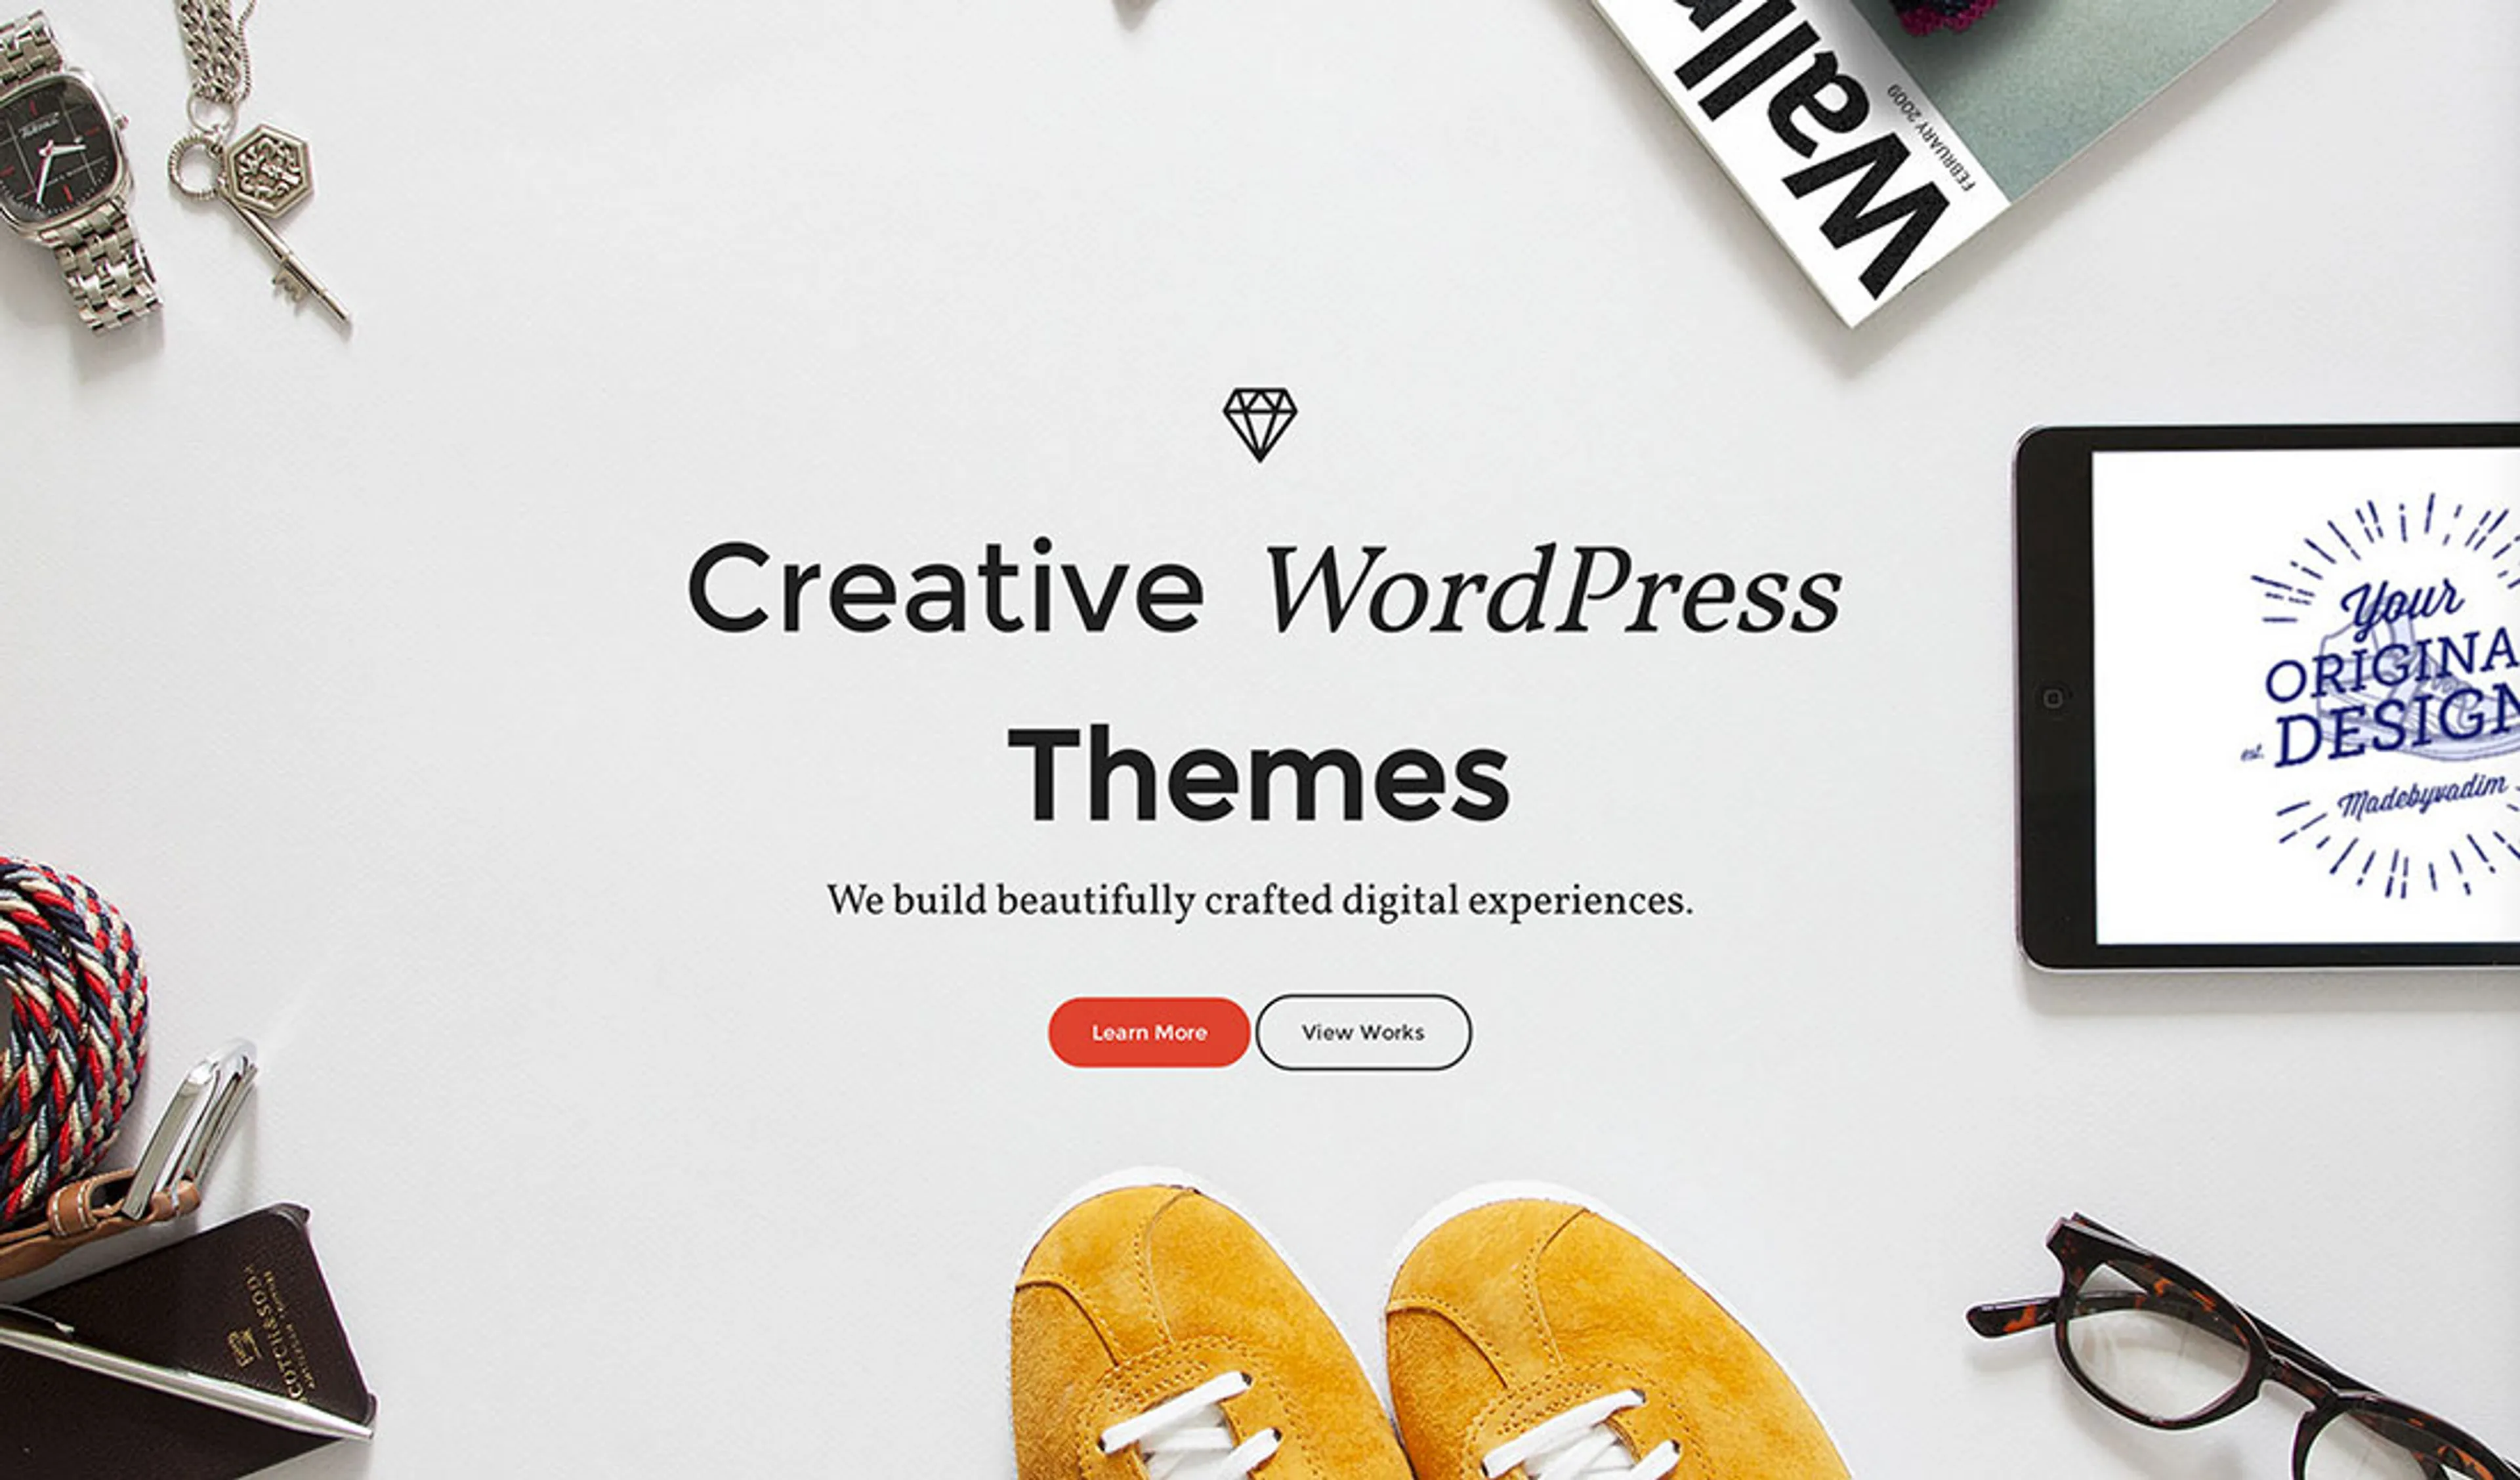 Mastering WordPress: A Step-by-Step Guide to Creating a Child Theme